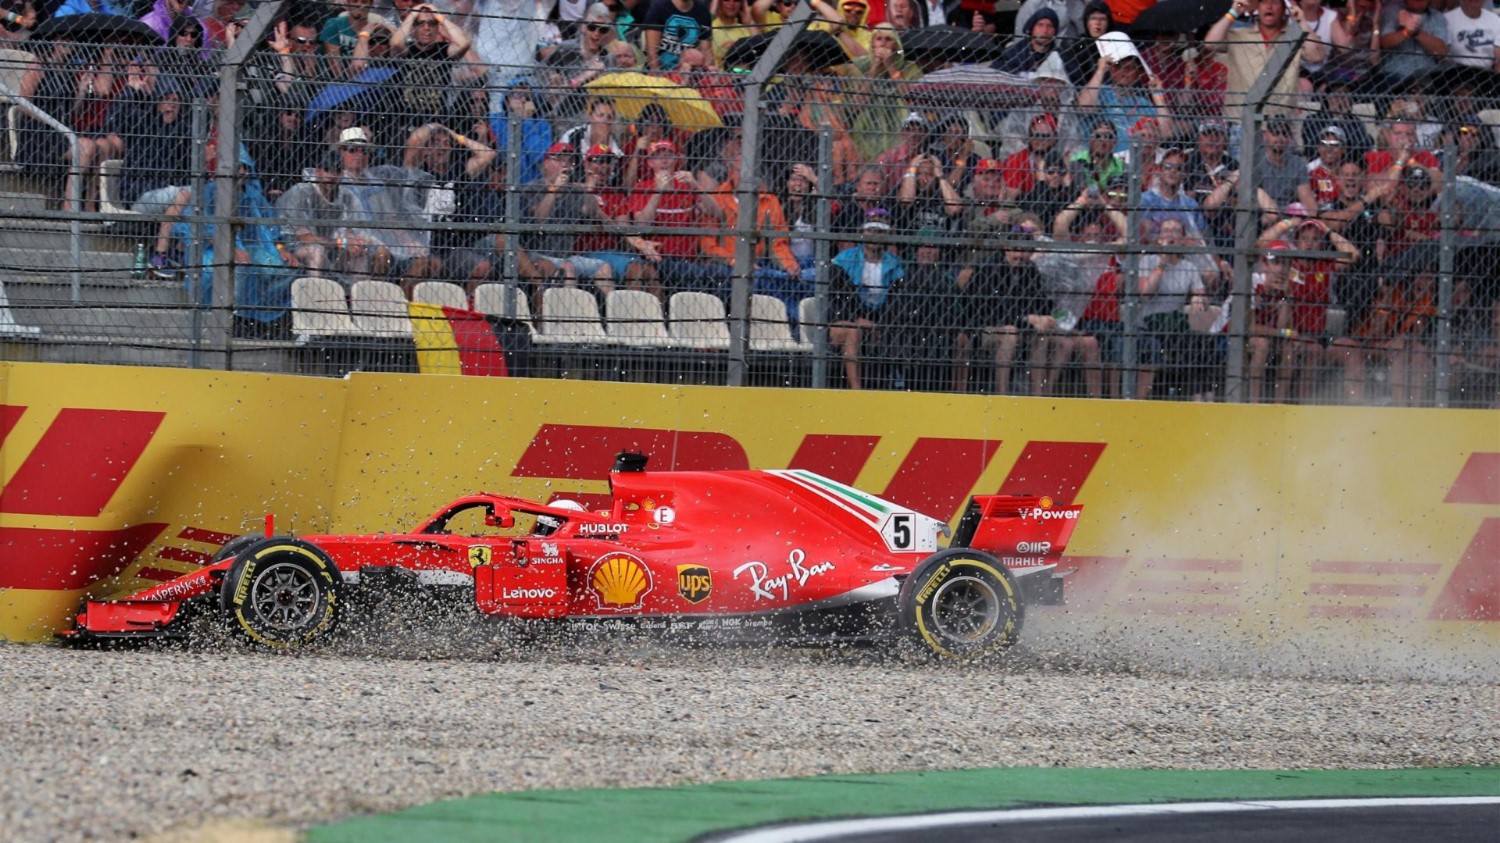 Vettel's crash in Germany in the rain will likely cost him the 2018 title